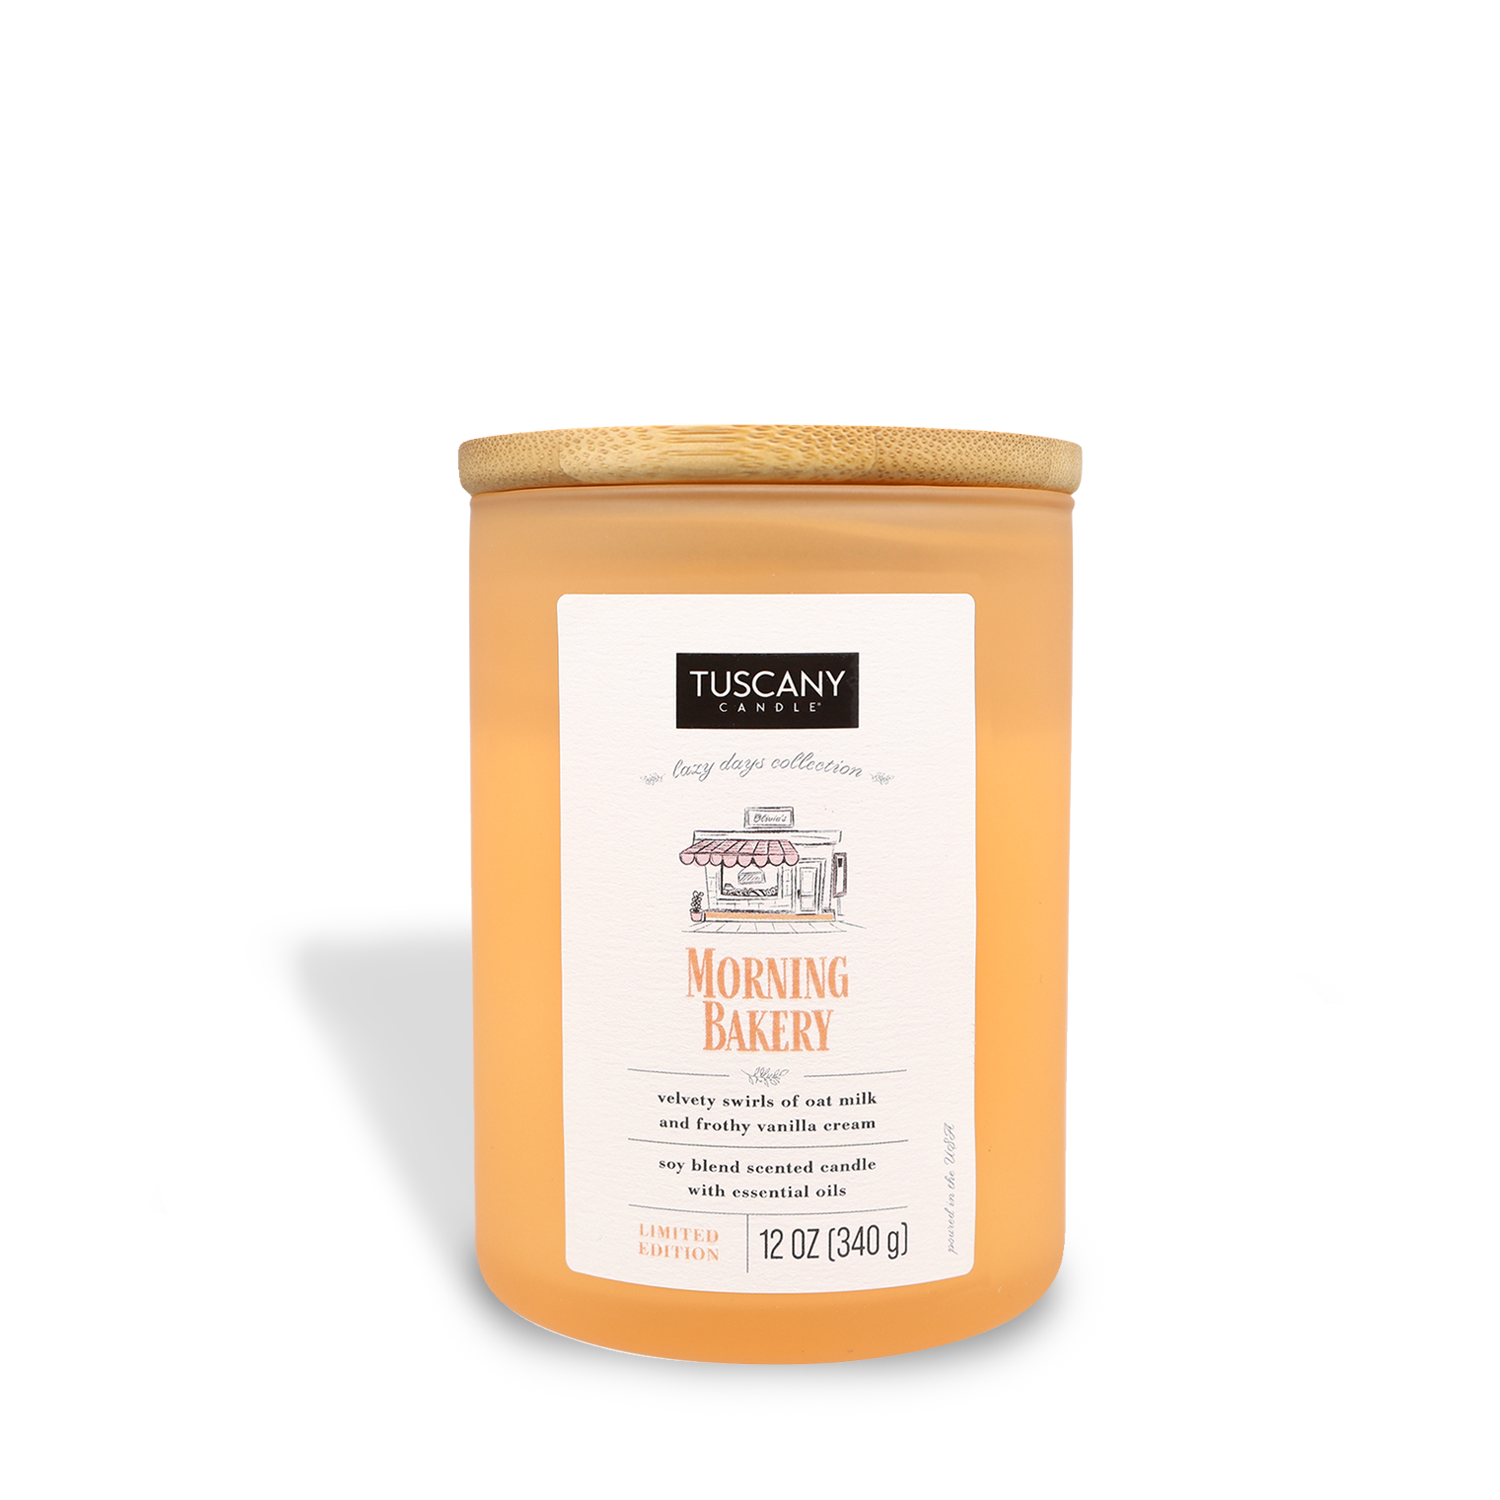 A jar of "Morning Bakery" scented candle with a beige label on a white background.